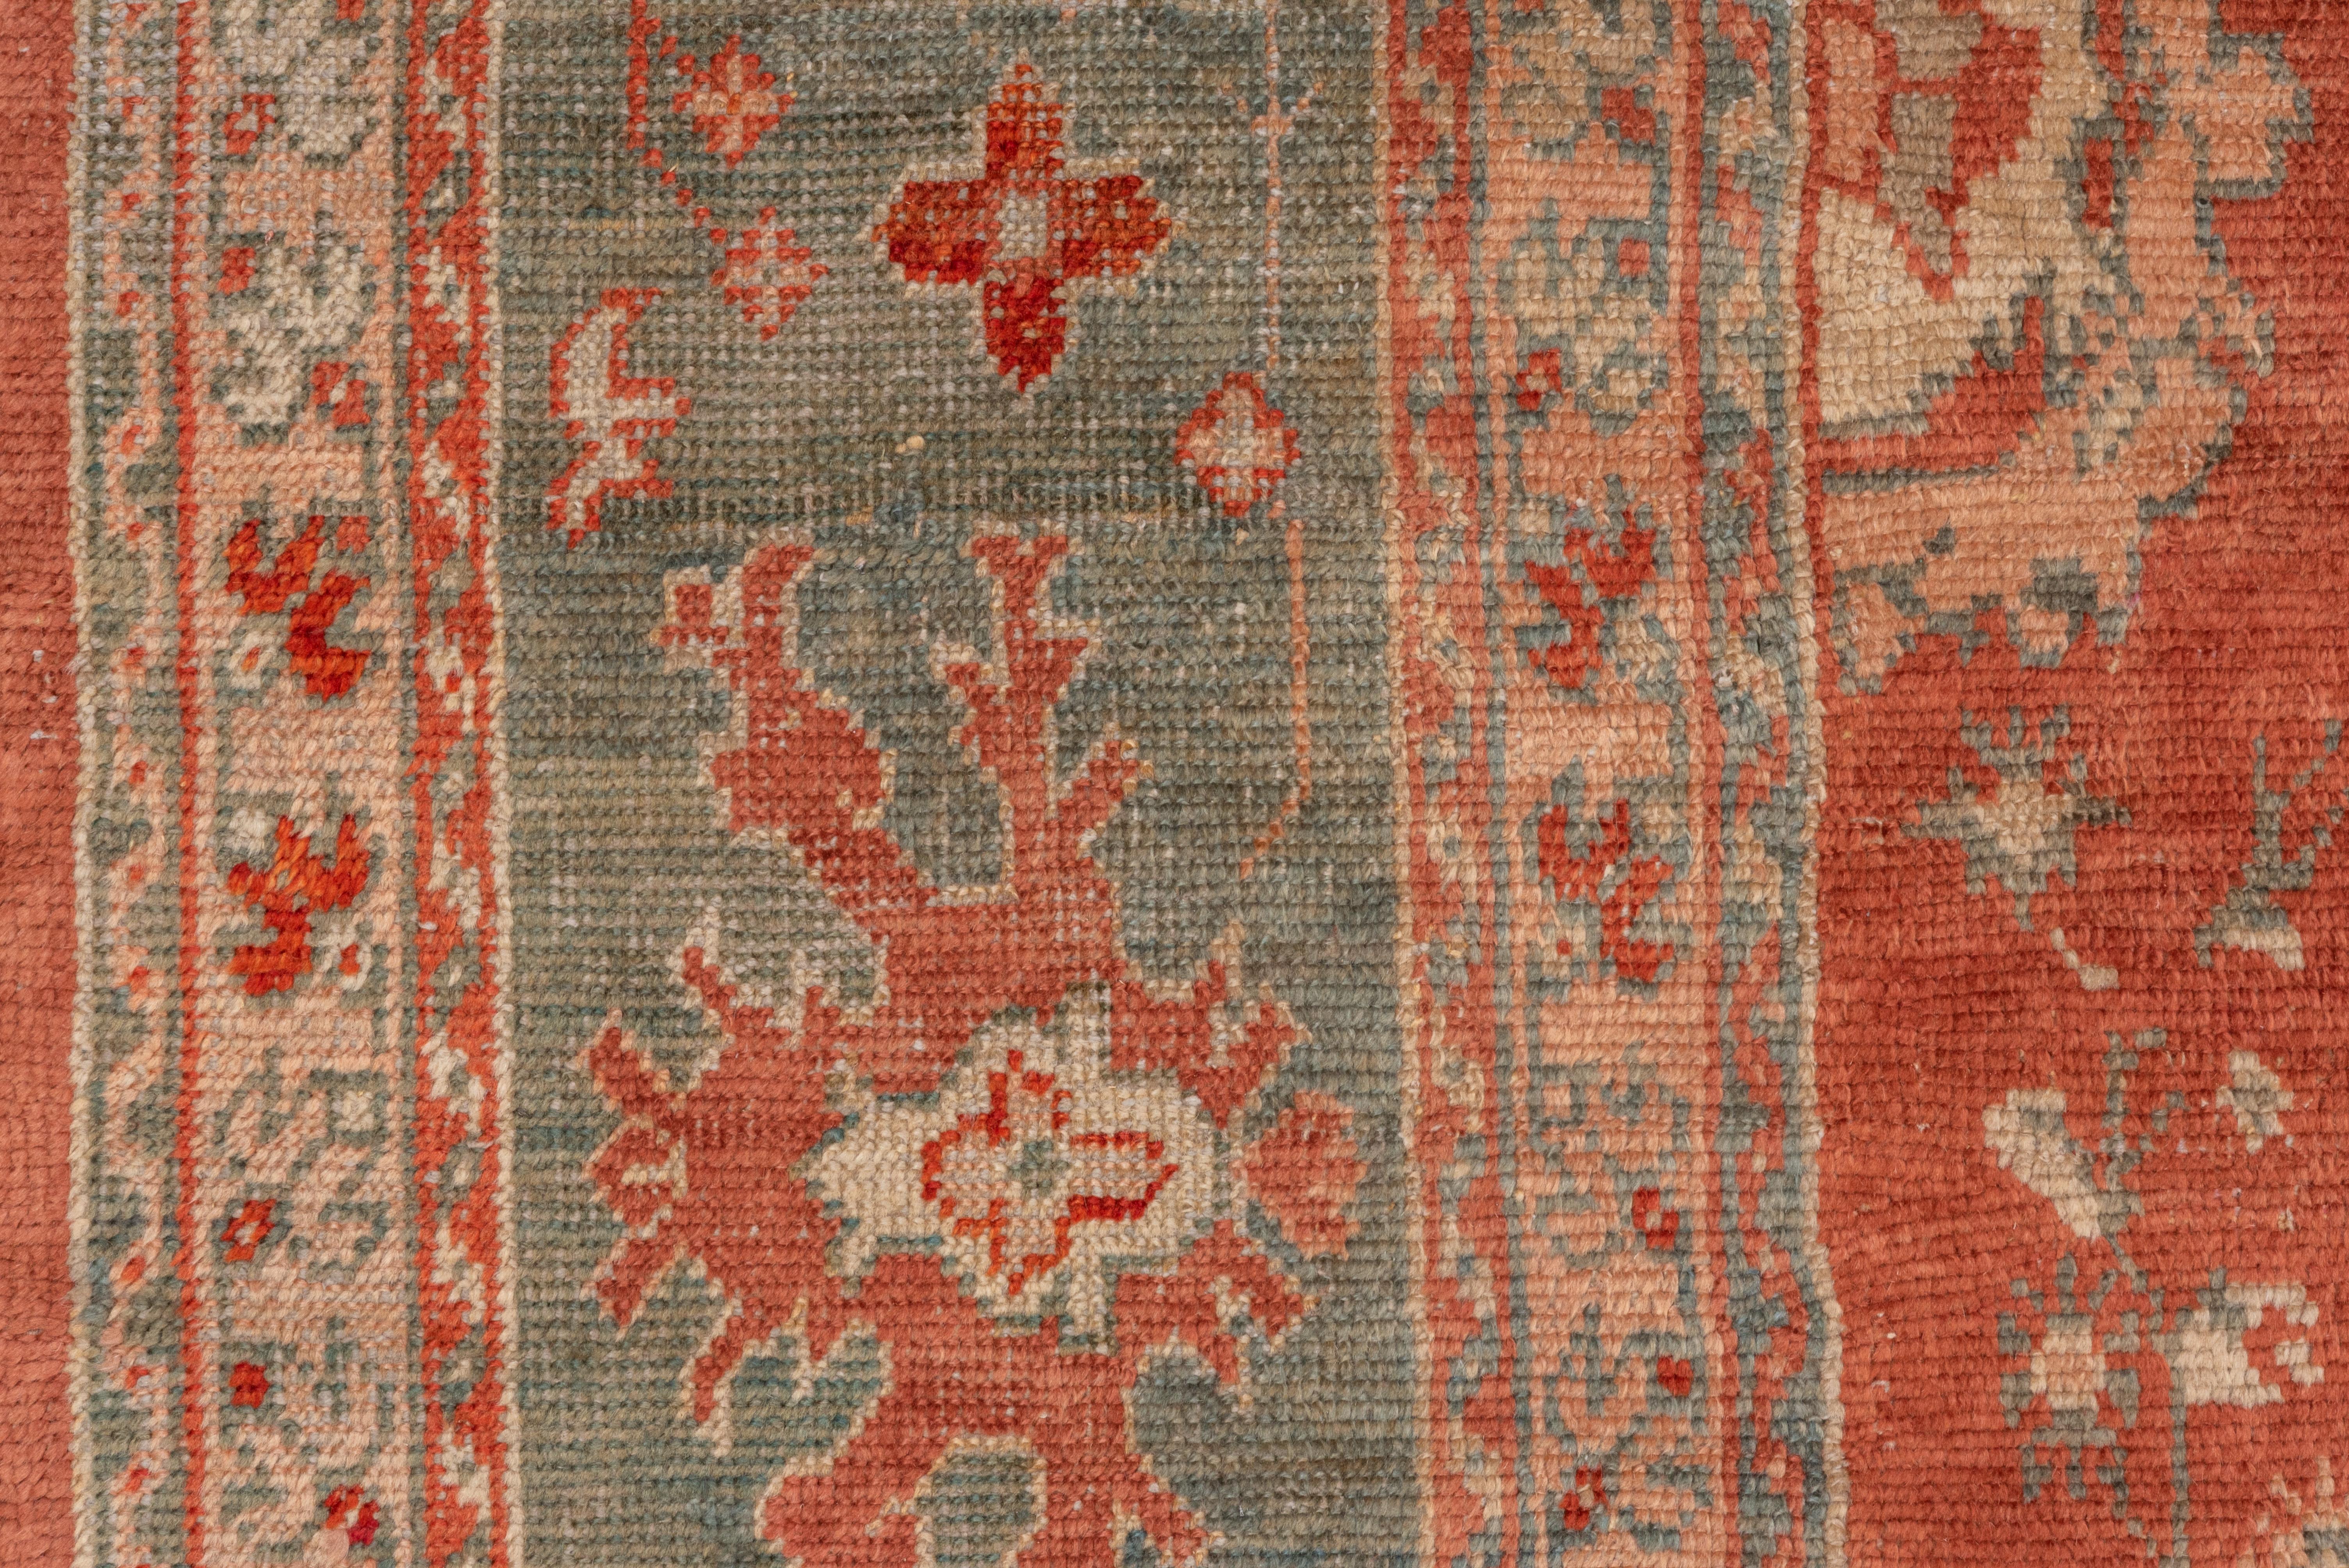 Hand-Knotted 1900s Rare Antique Turkish Oushak Carpet, Rusty Red Allover Field, Green Borders For Sale